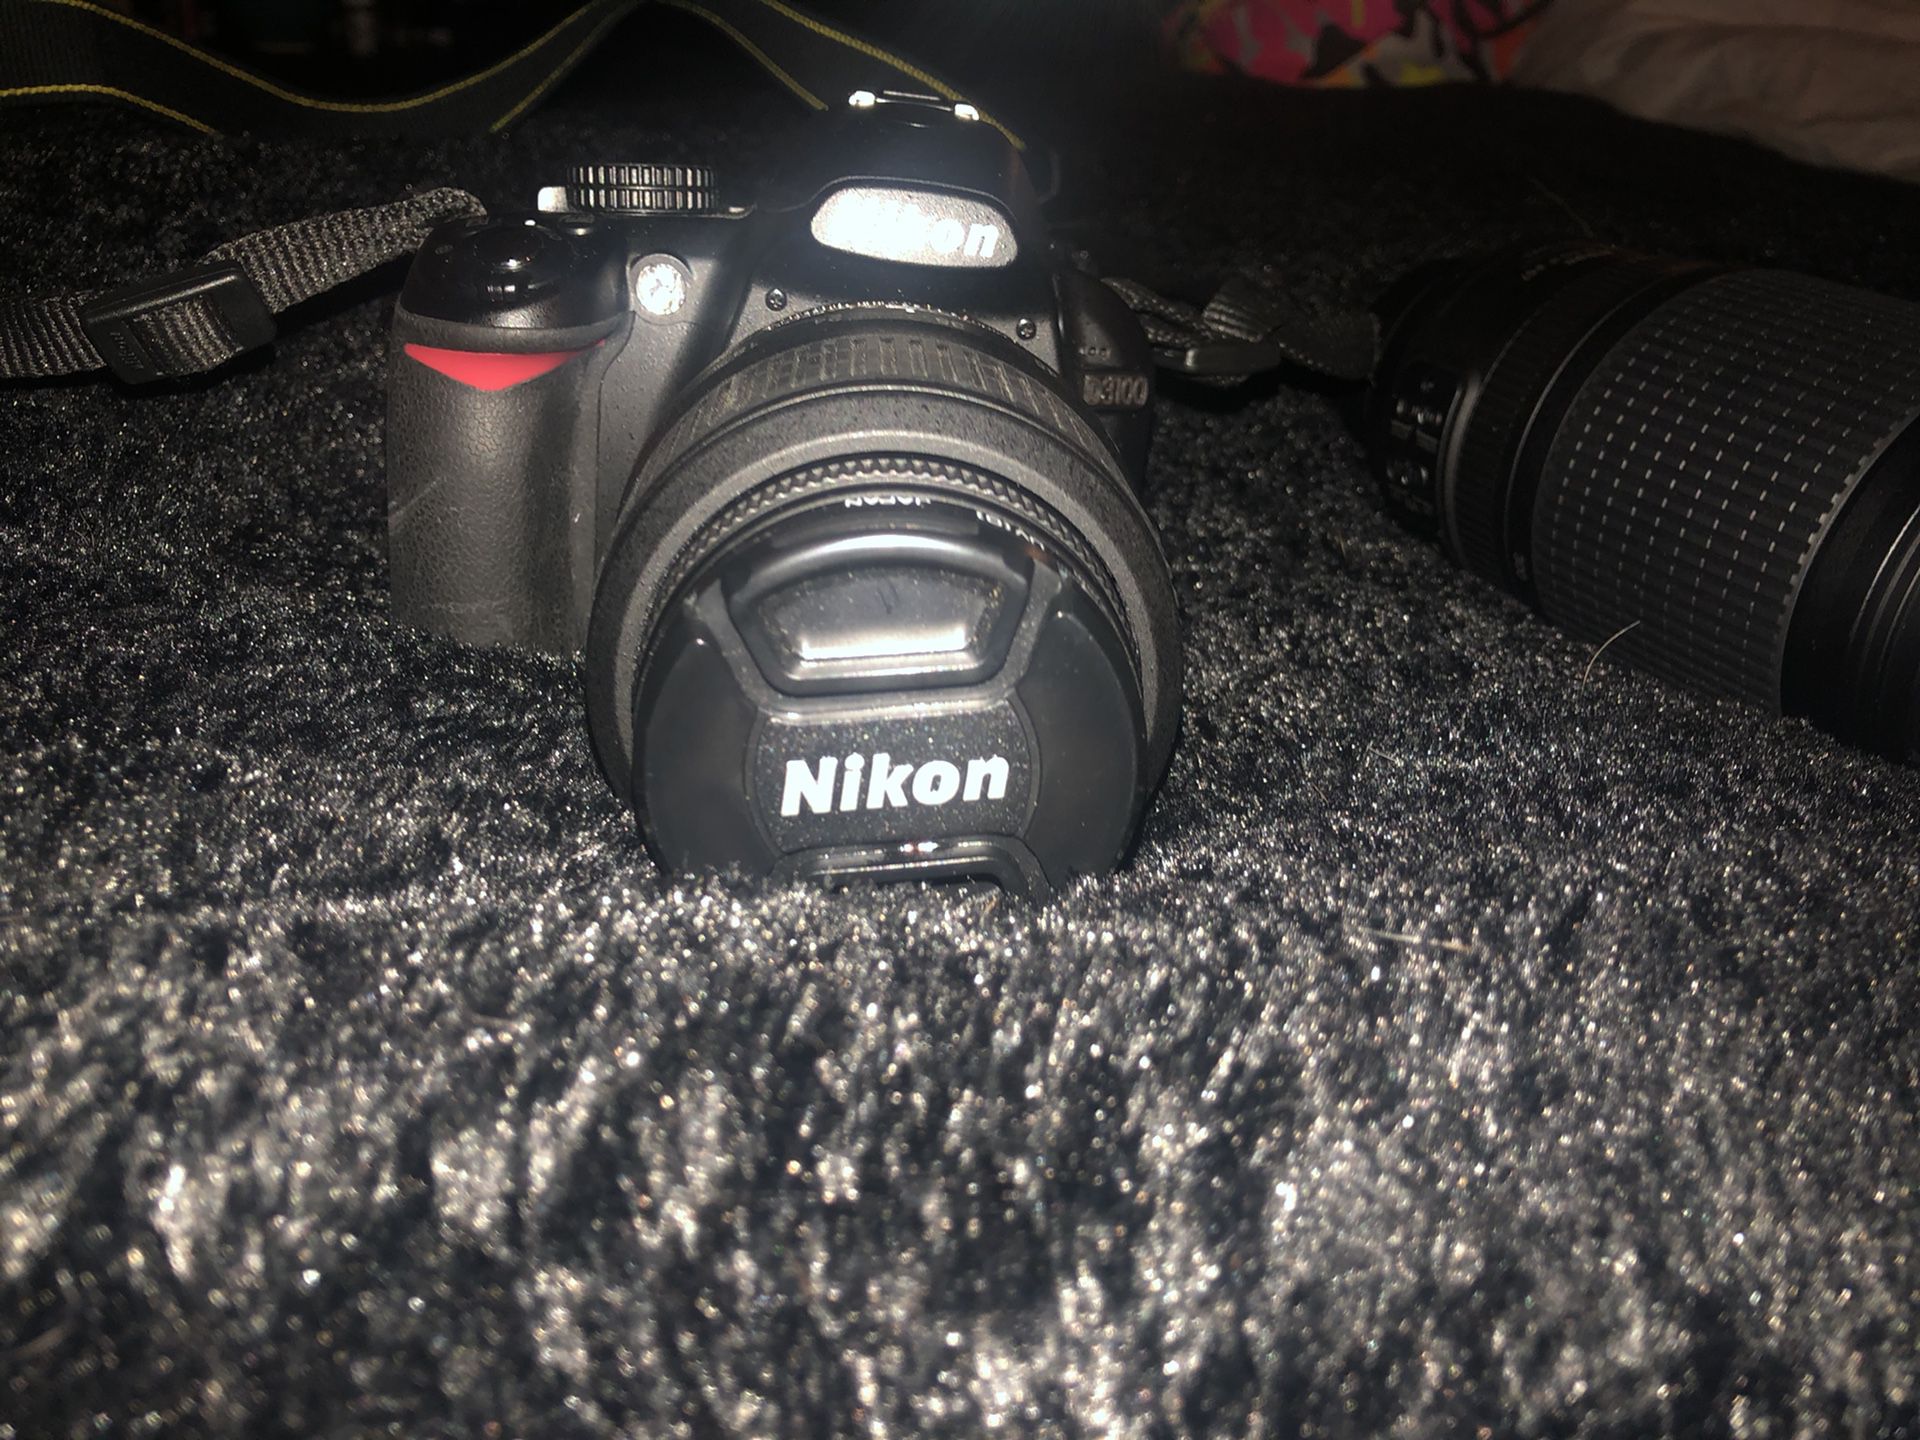 Nikon Camera with 55mm and 300mm lens